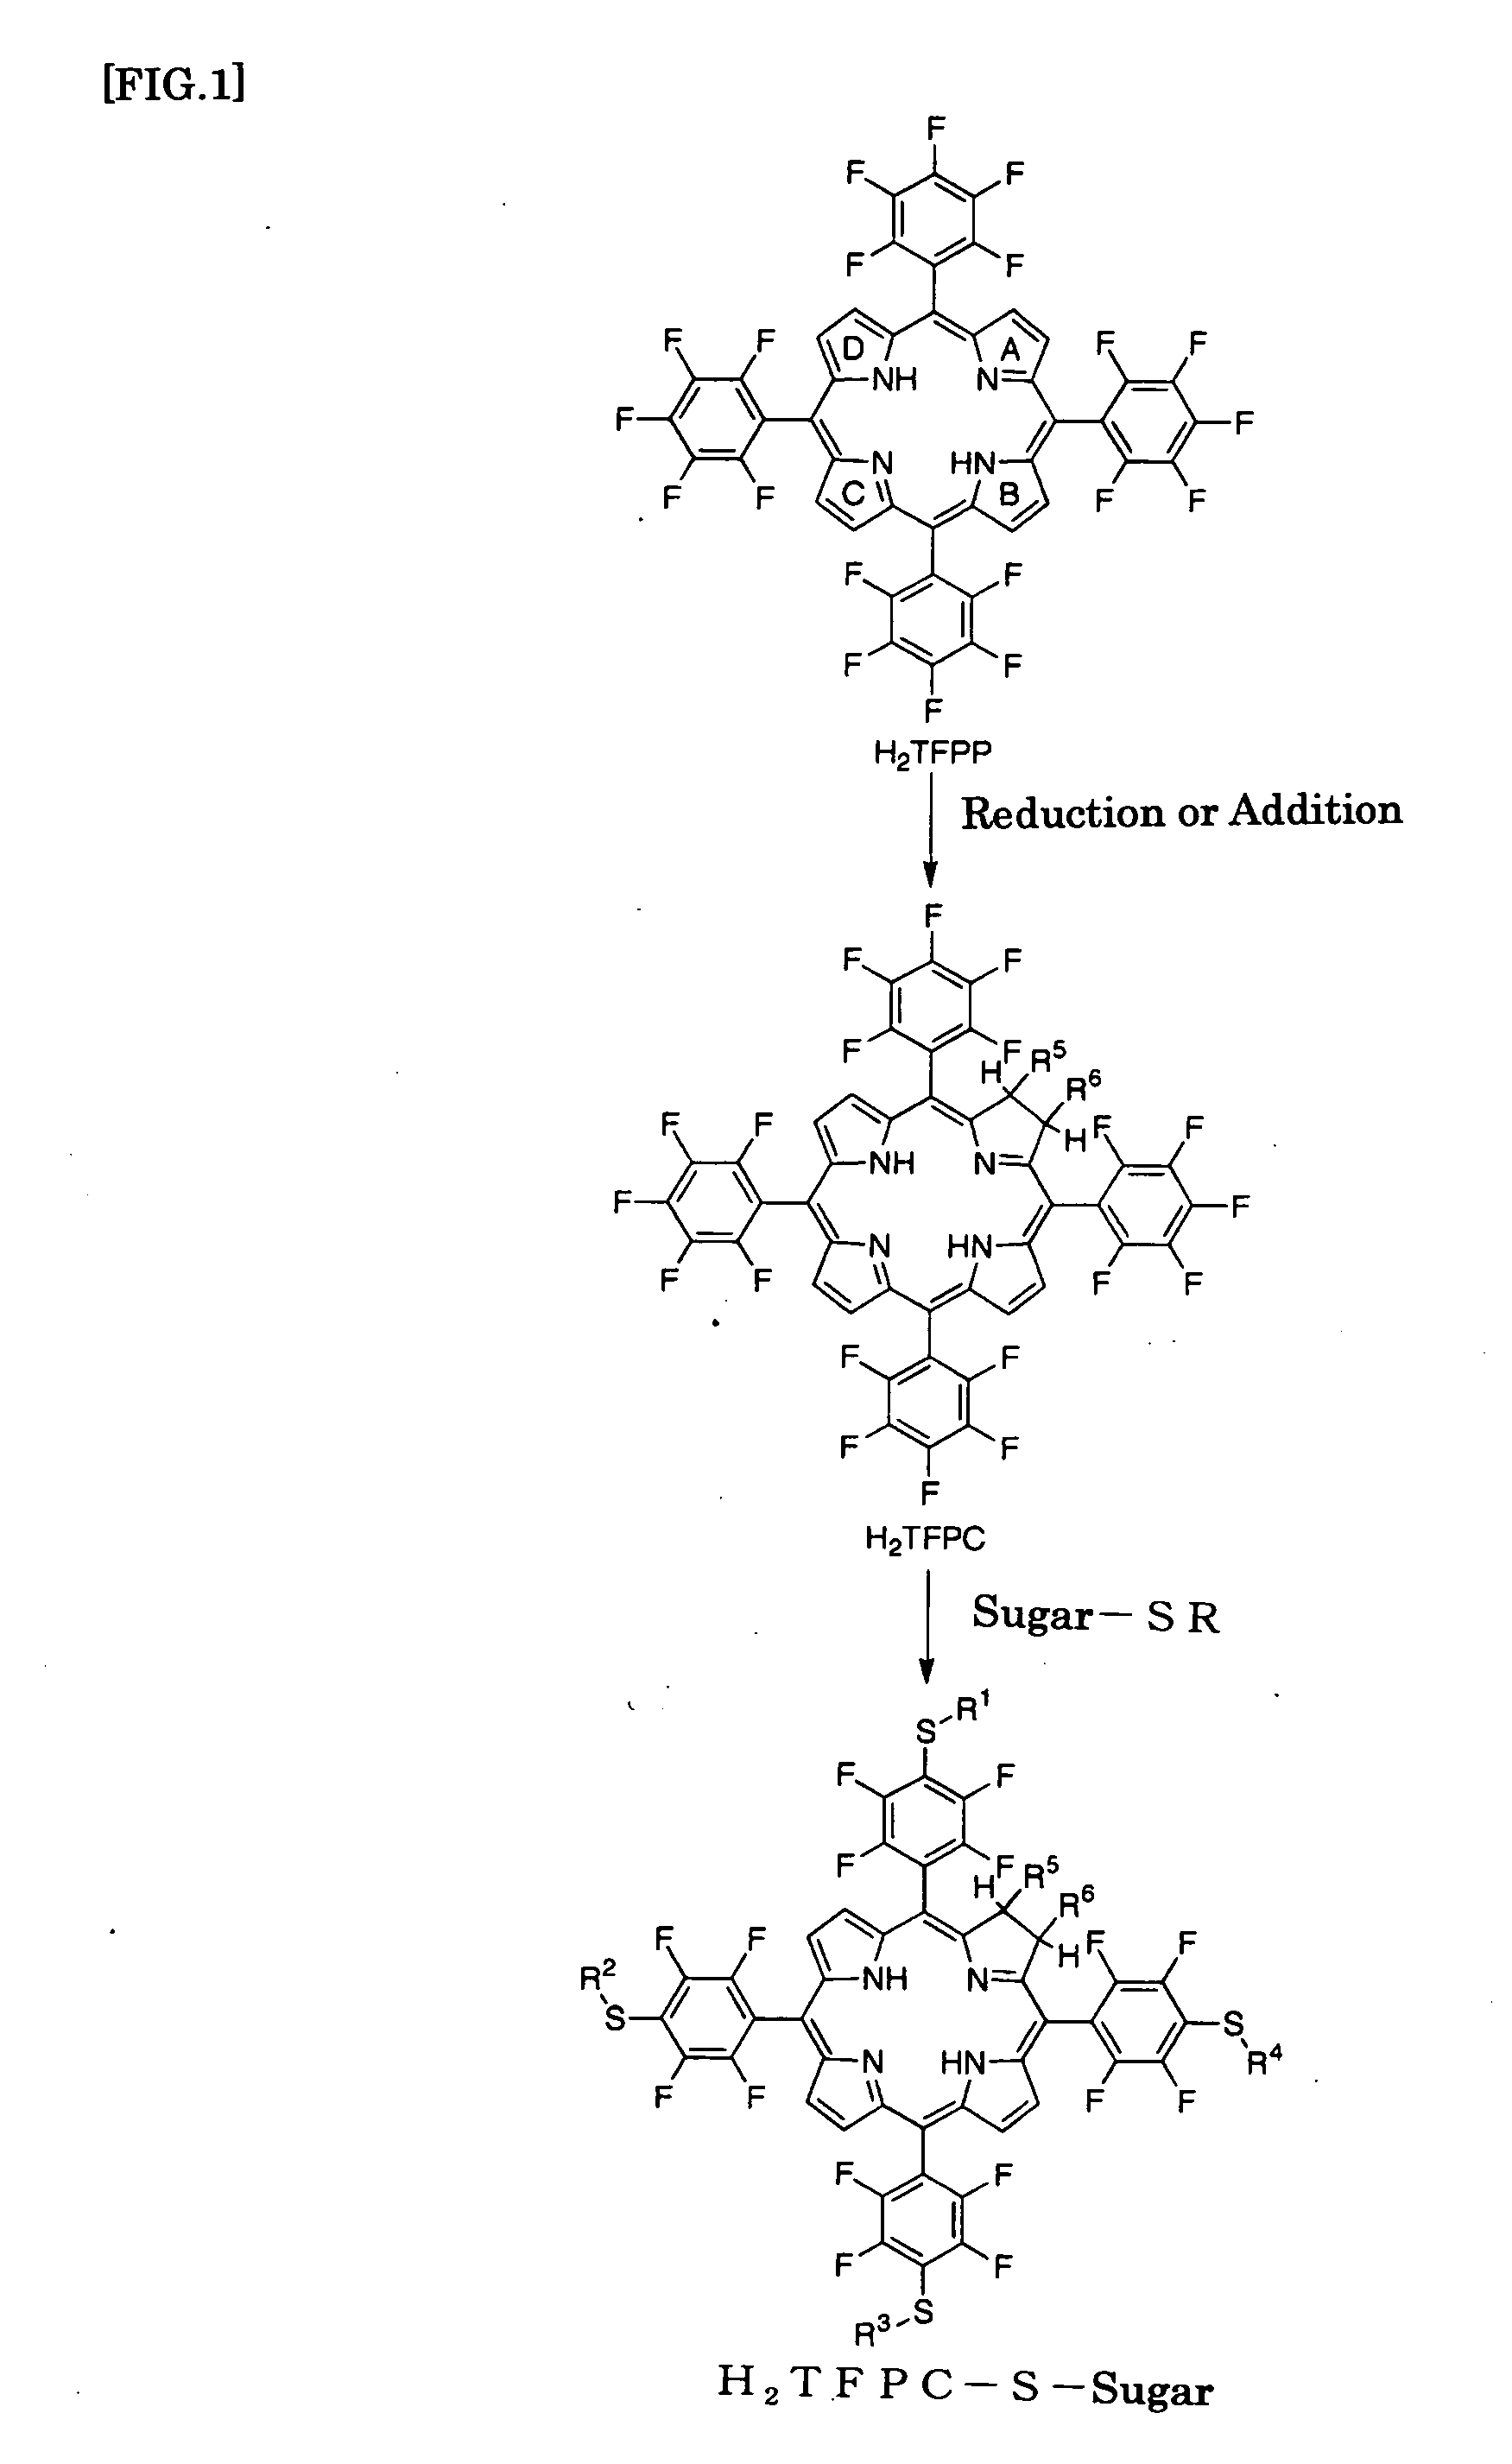 Novel glycoconjugated chlorin derivatives and method of producing the same